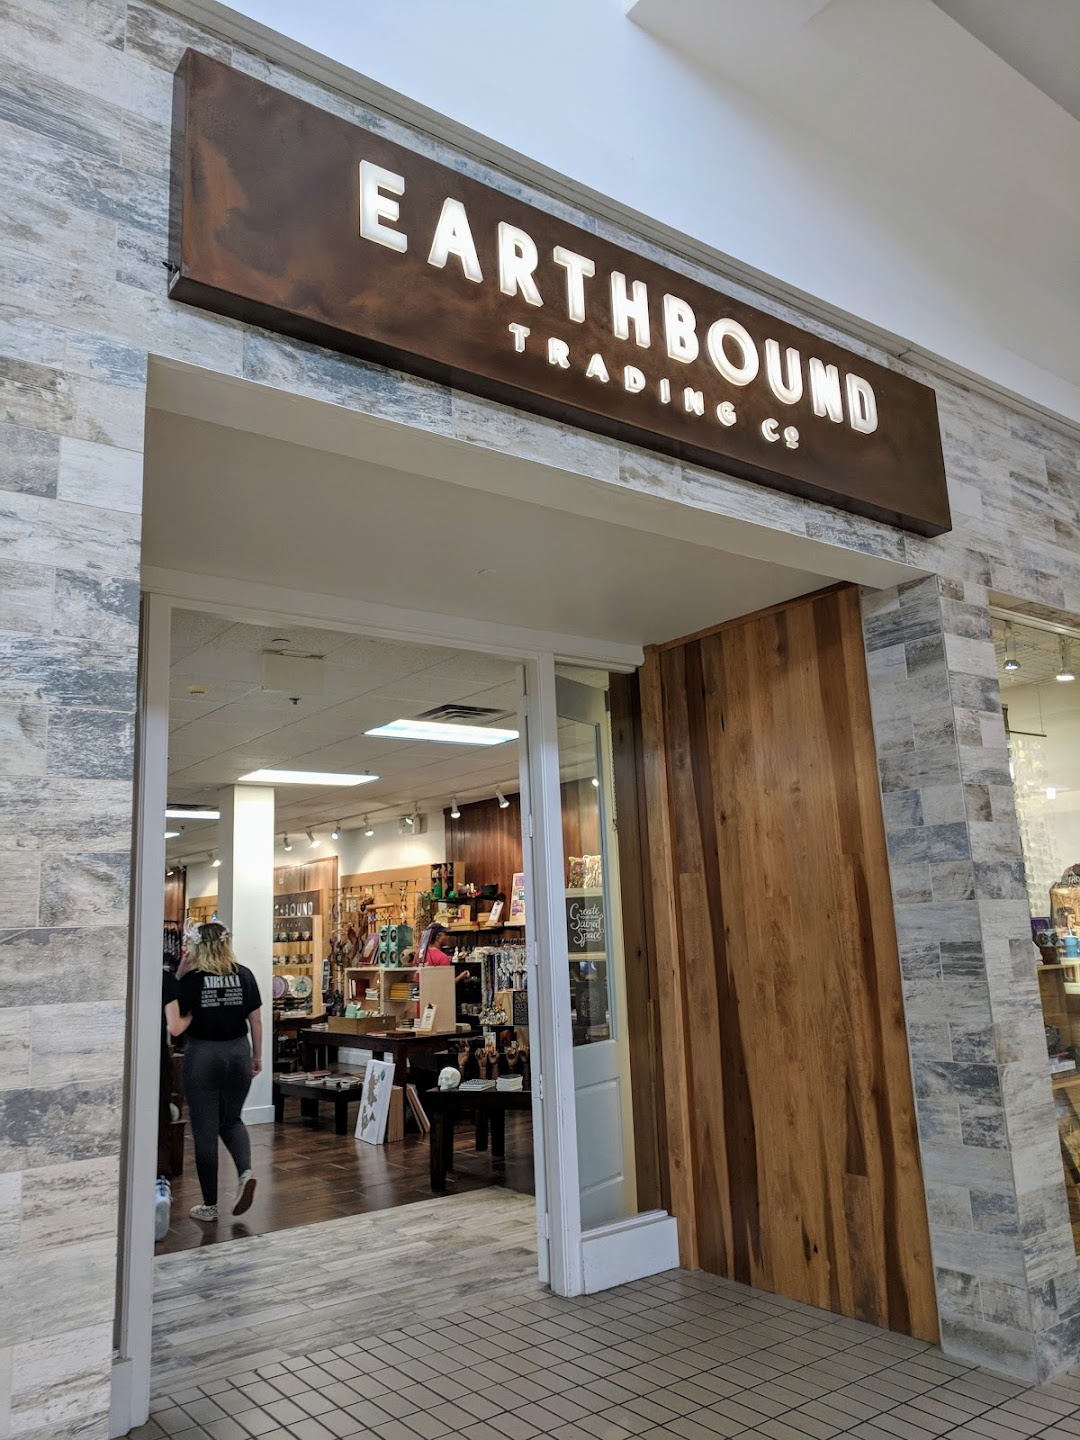 Earthbound